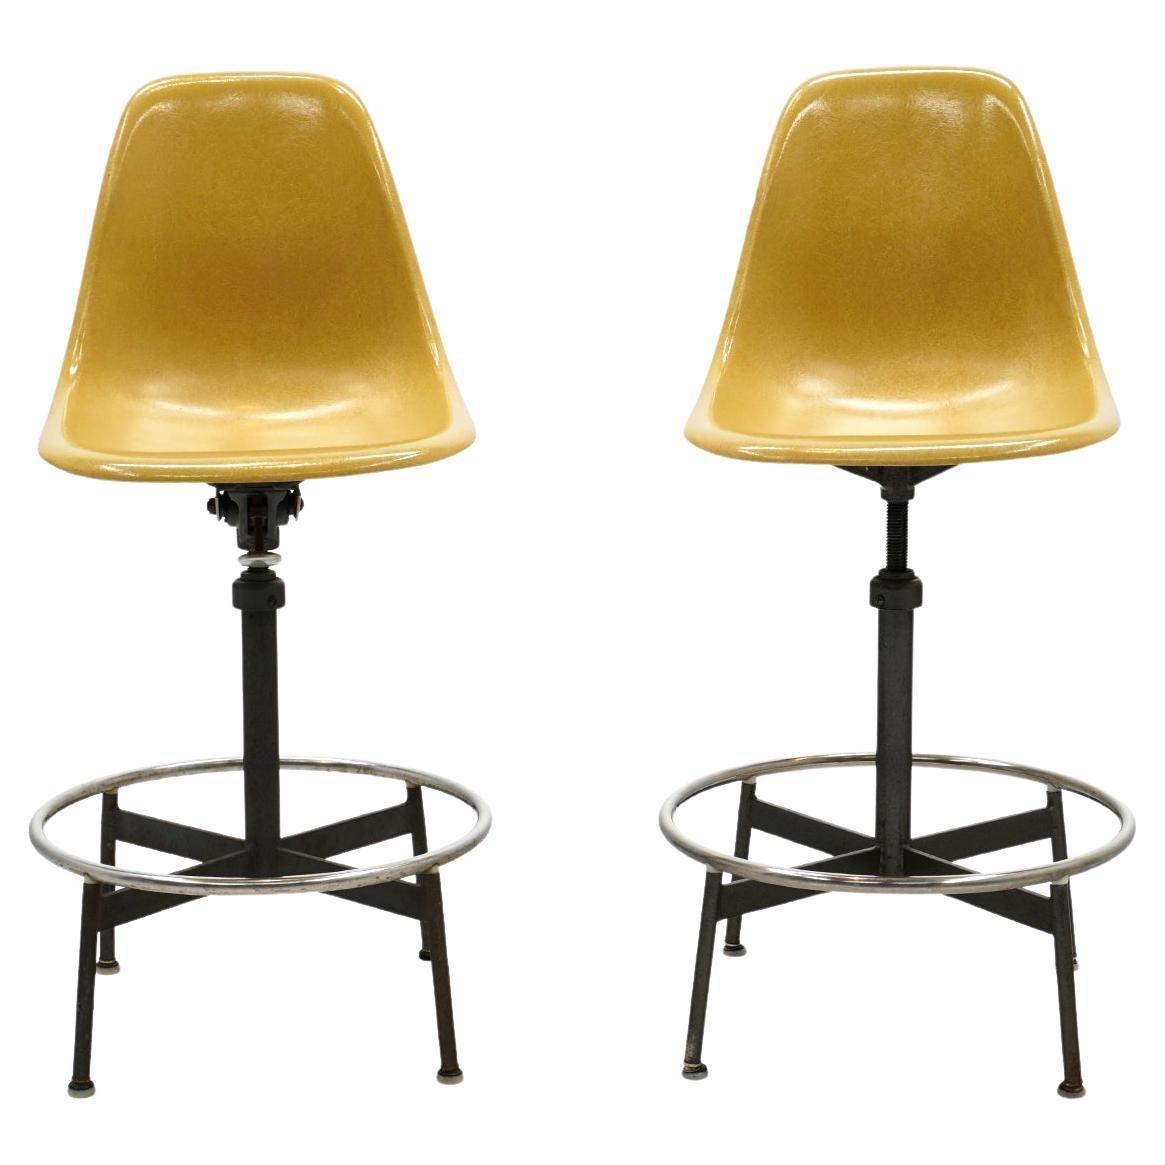 Pair of Yellow, Swivel Barstools / Drafting Stools by Charles and Ray Eames For Sale